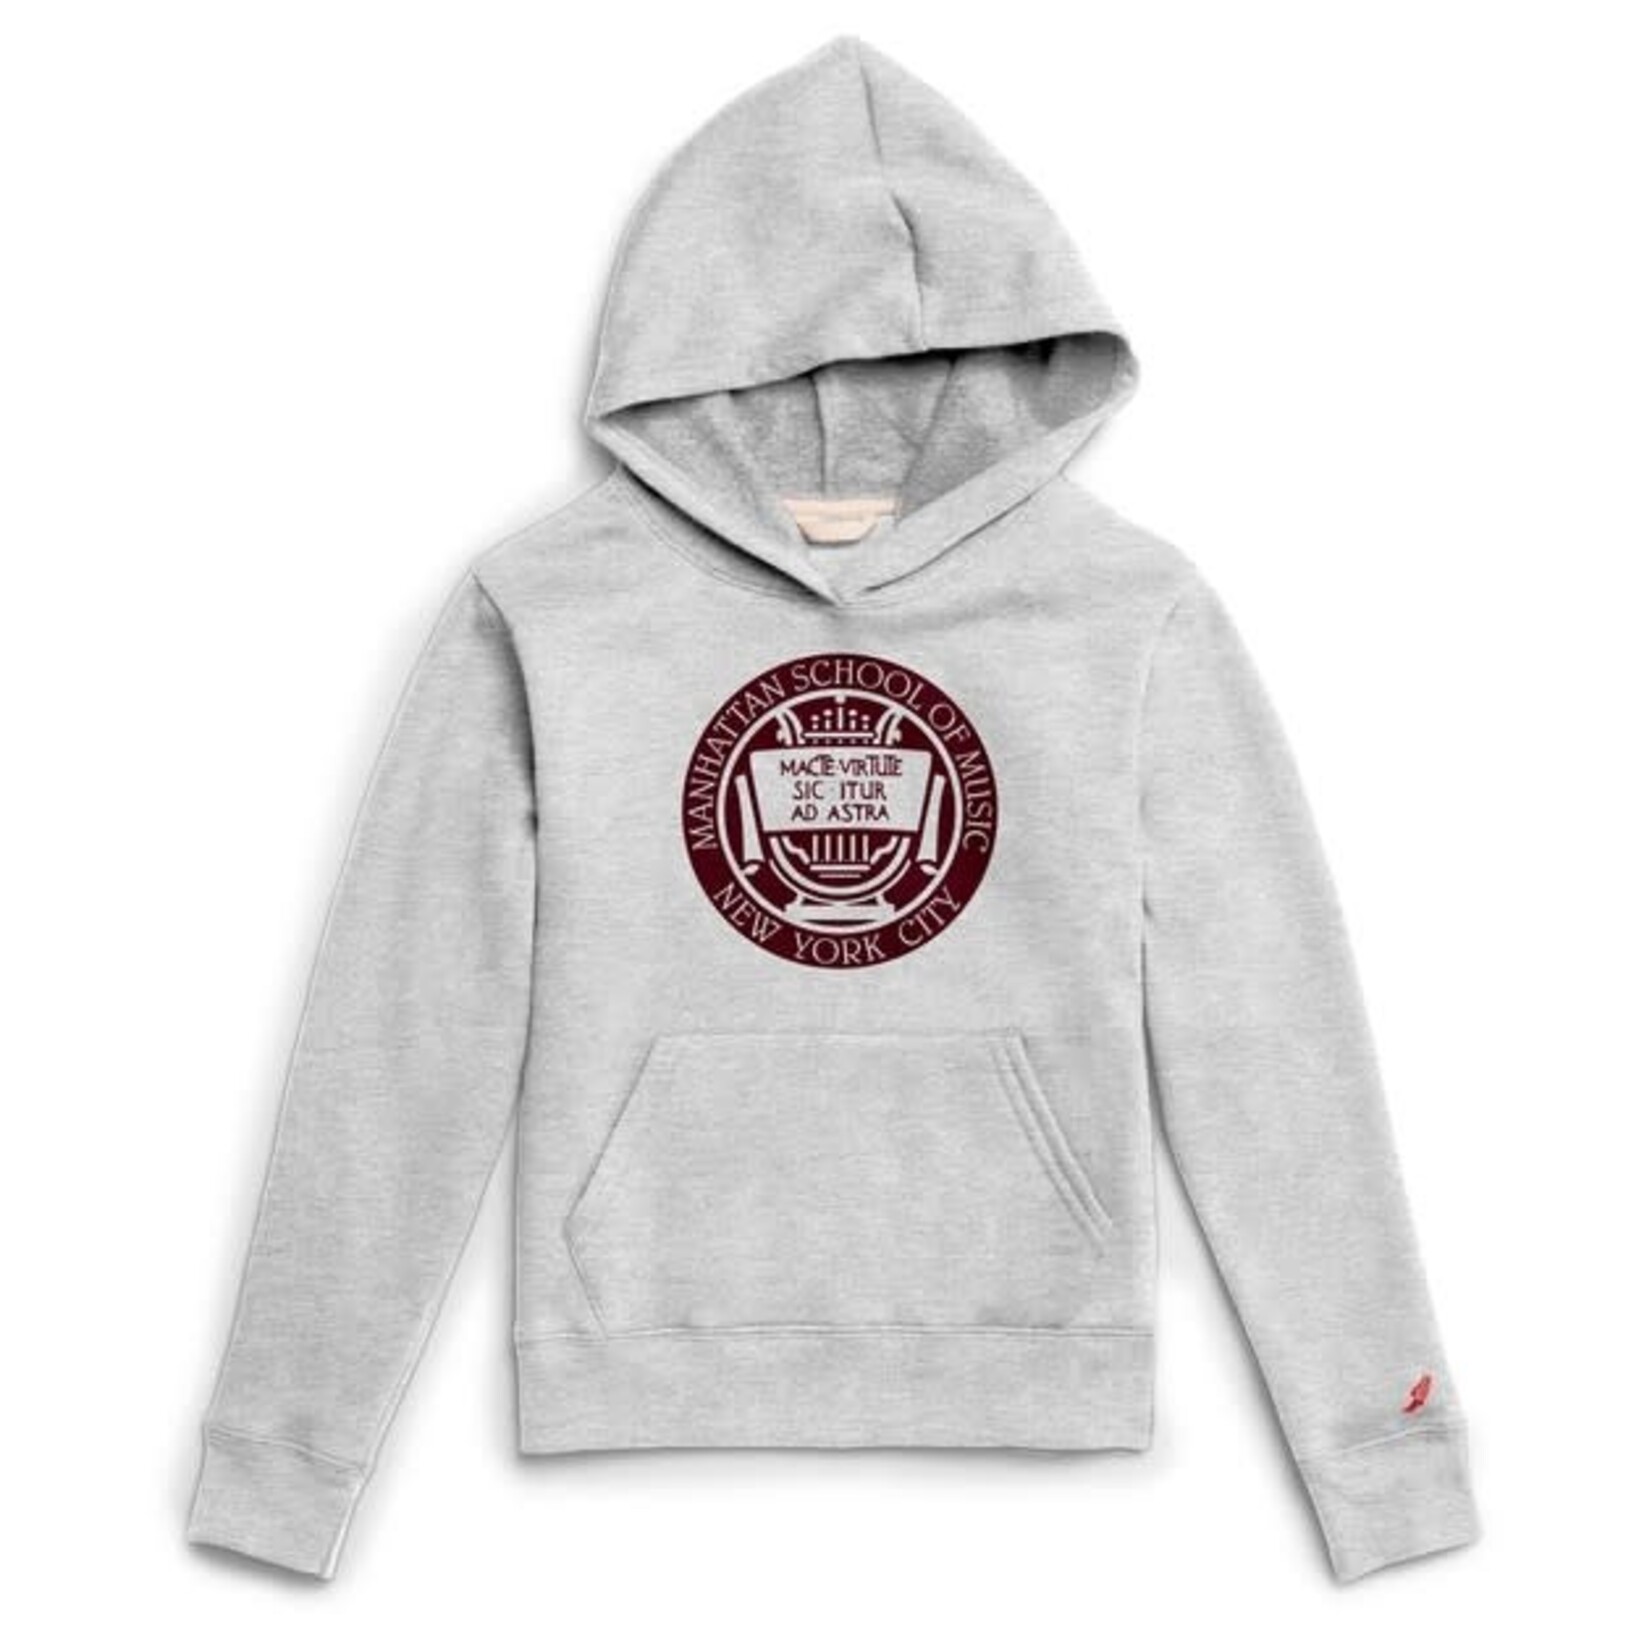 Youth Hoodie - Gray with MSM Seal